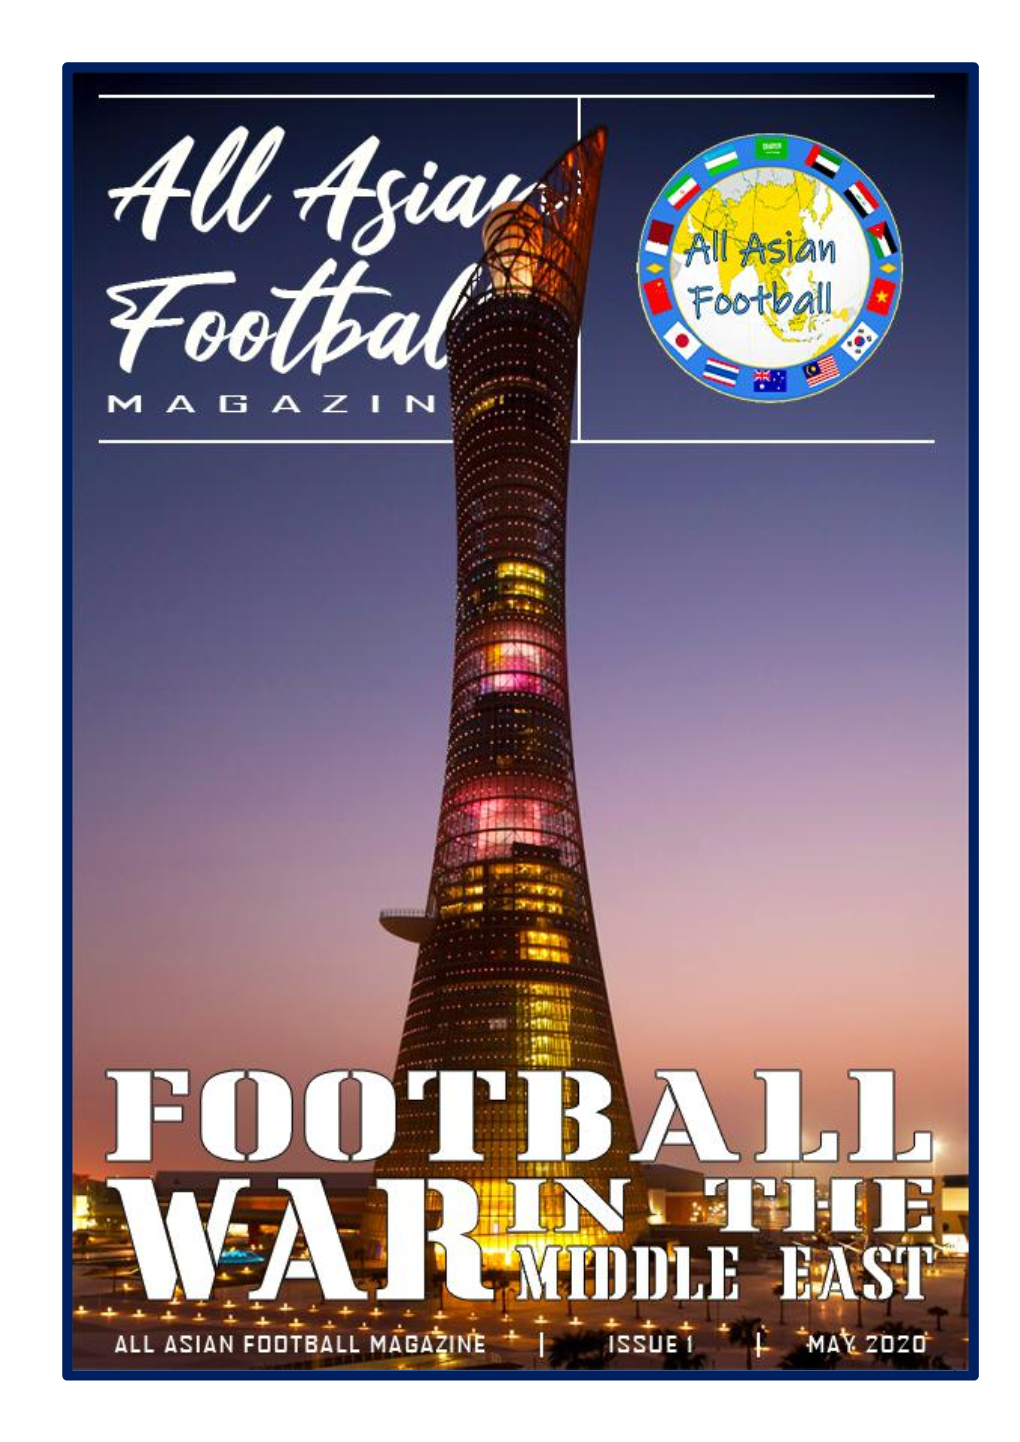 Asian Football Magazine, a New Project That Will Focus on Different Regions of Asia, Exploring Football, Economic and Social Issues Linked to Our Favorite Sport